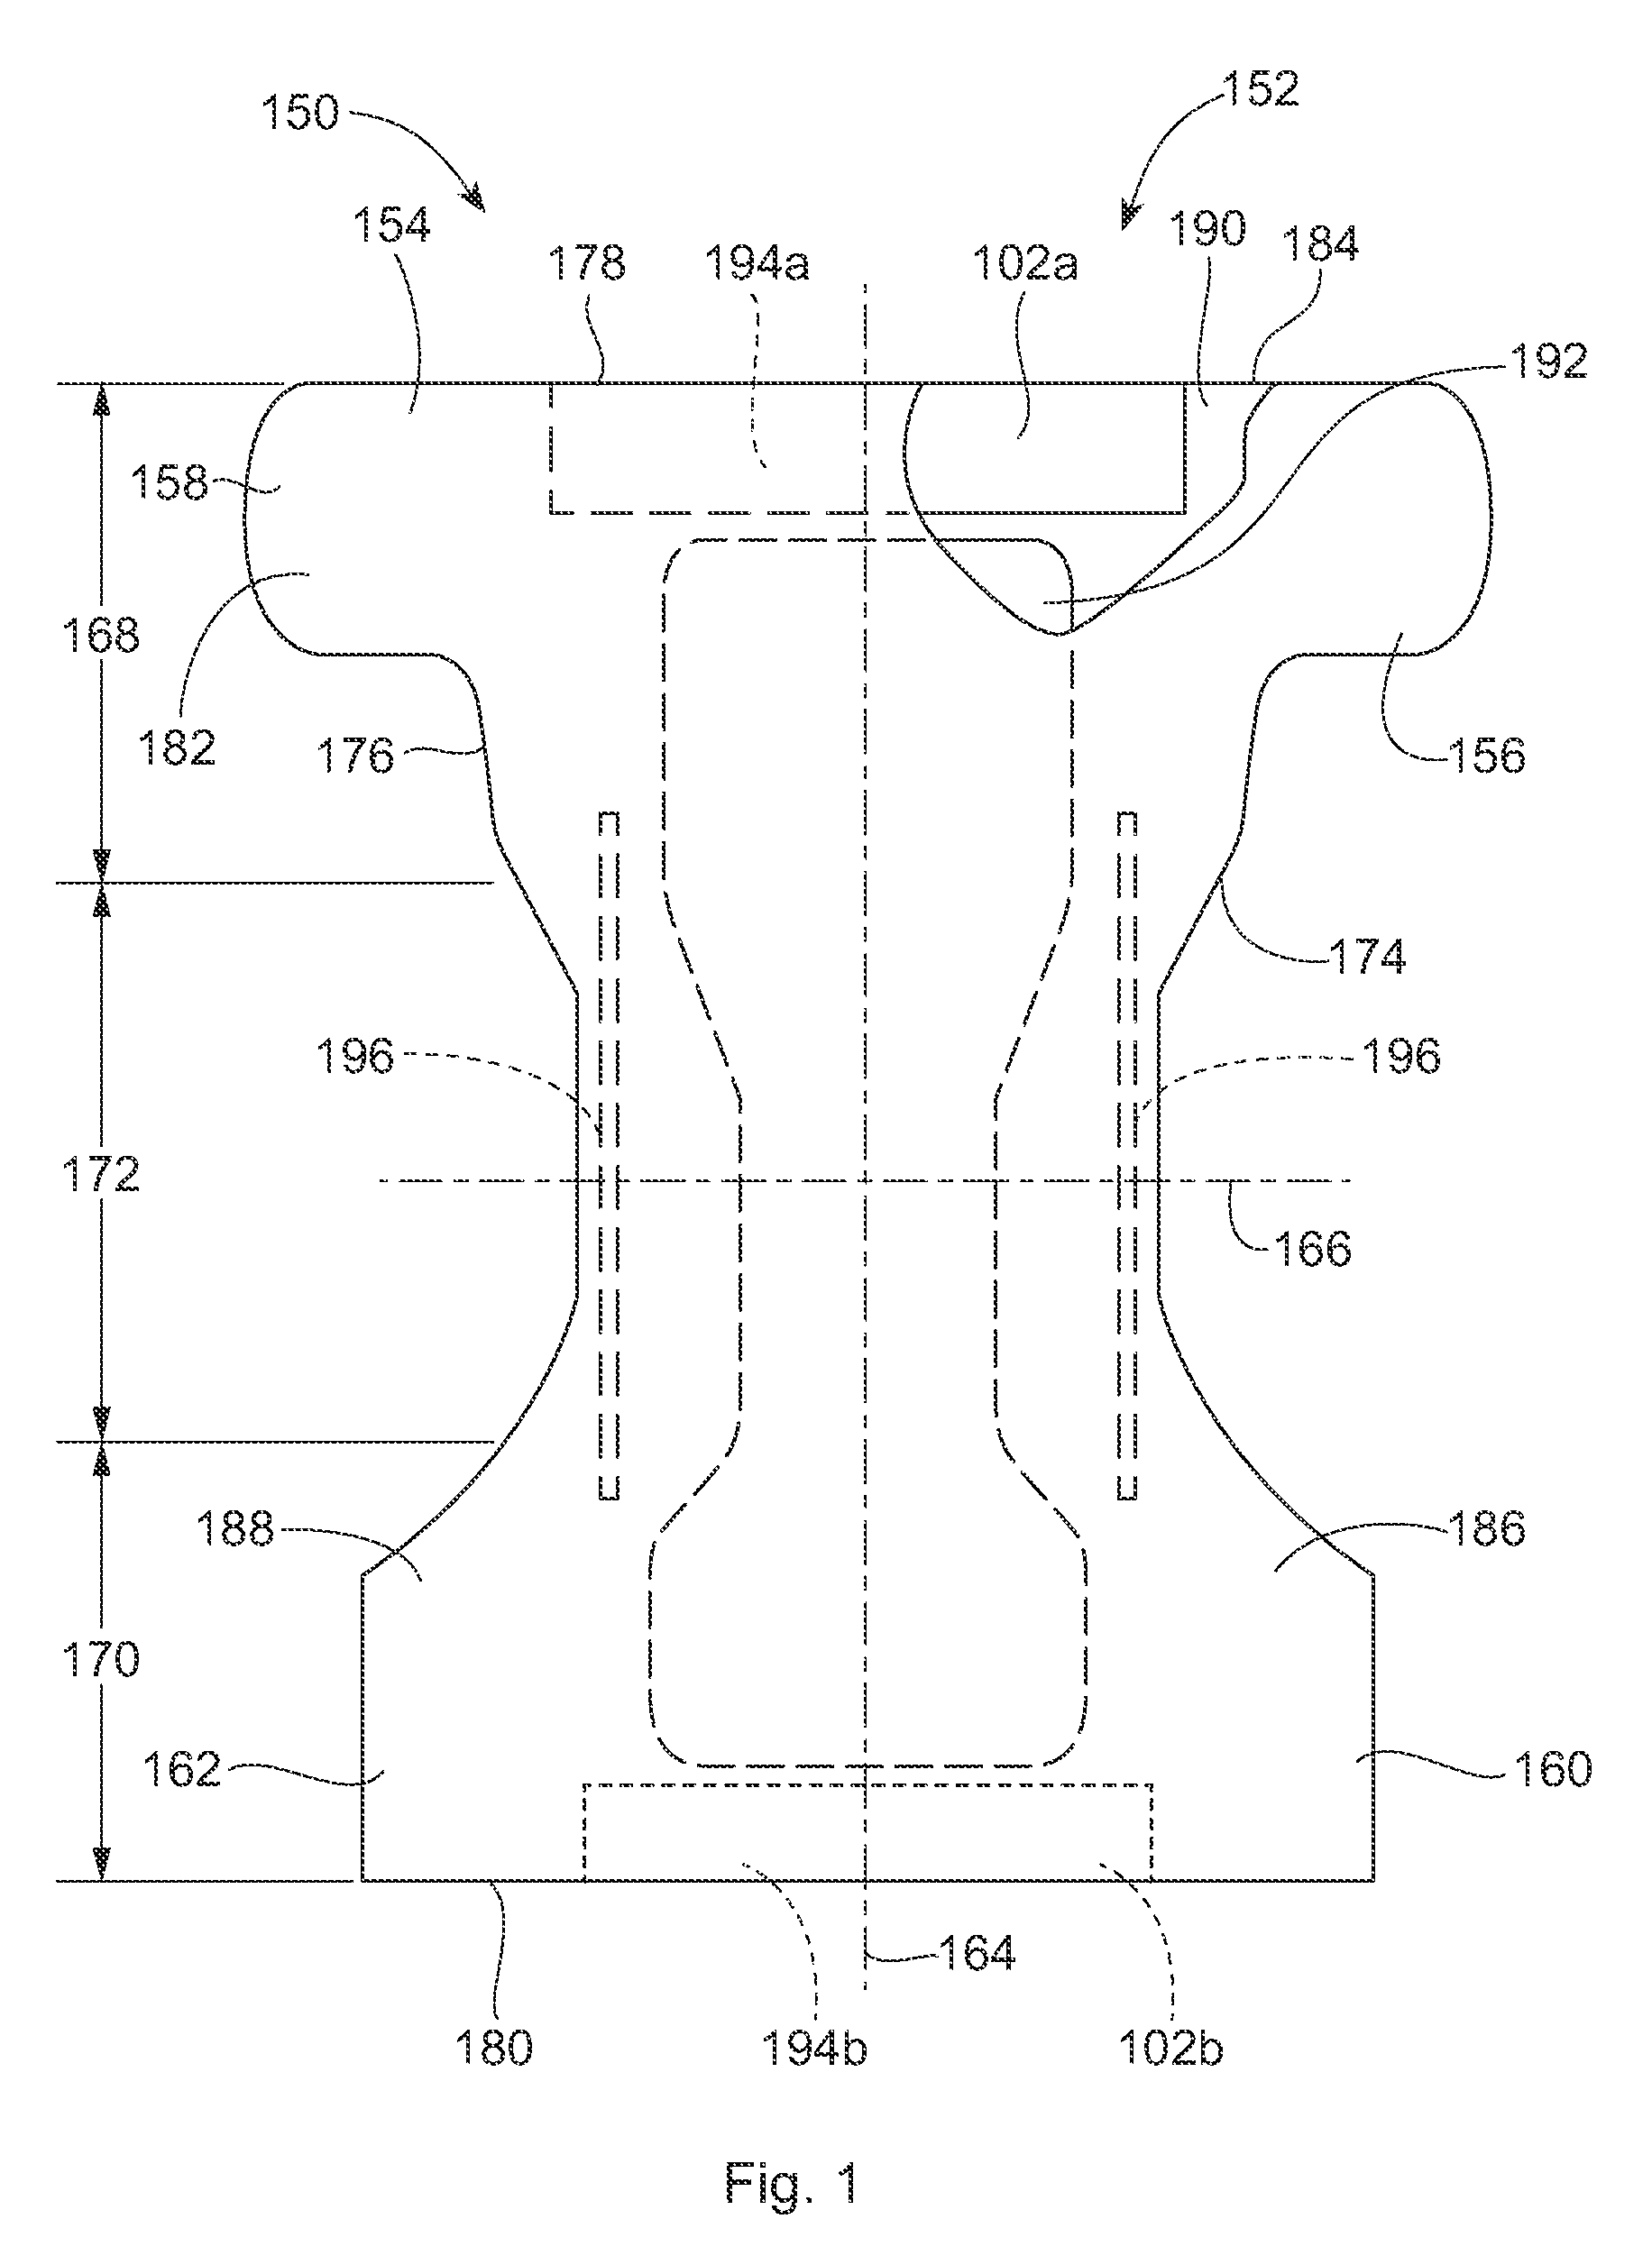 Method and apparatus for attaching elastic components to absorbent articles